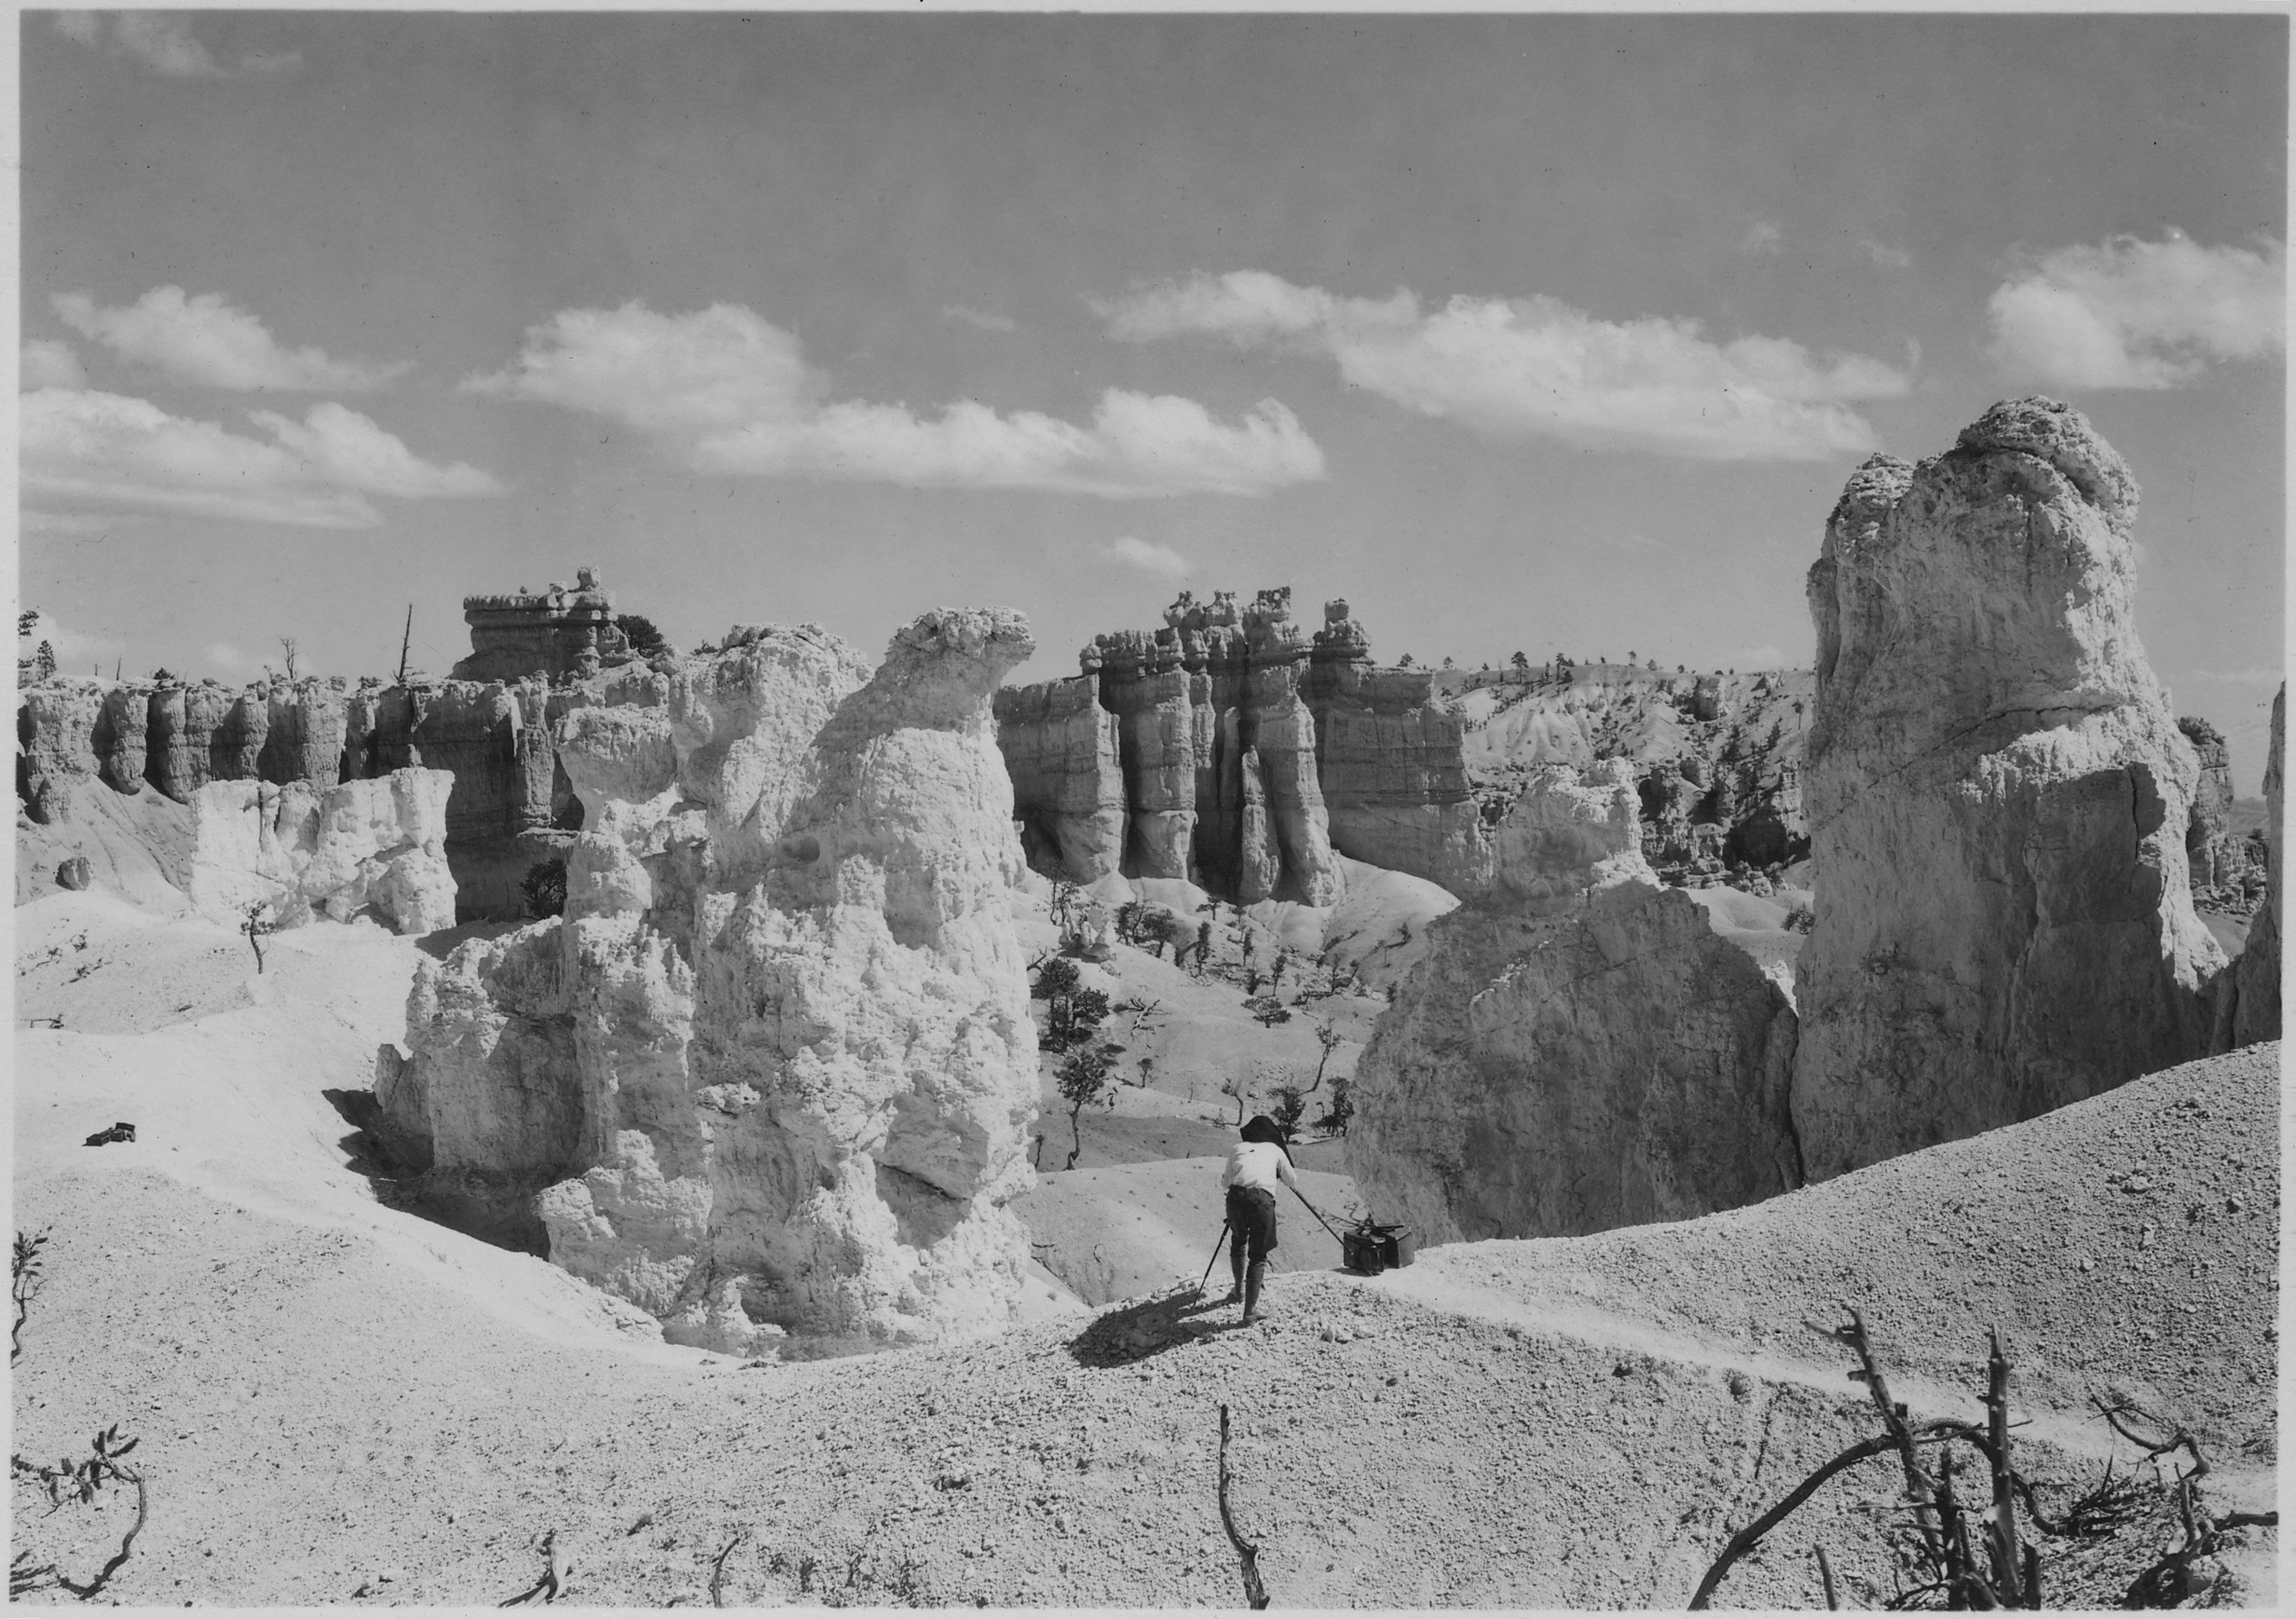 Photographing in Bryce Canyon. - NARA - 520302